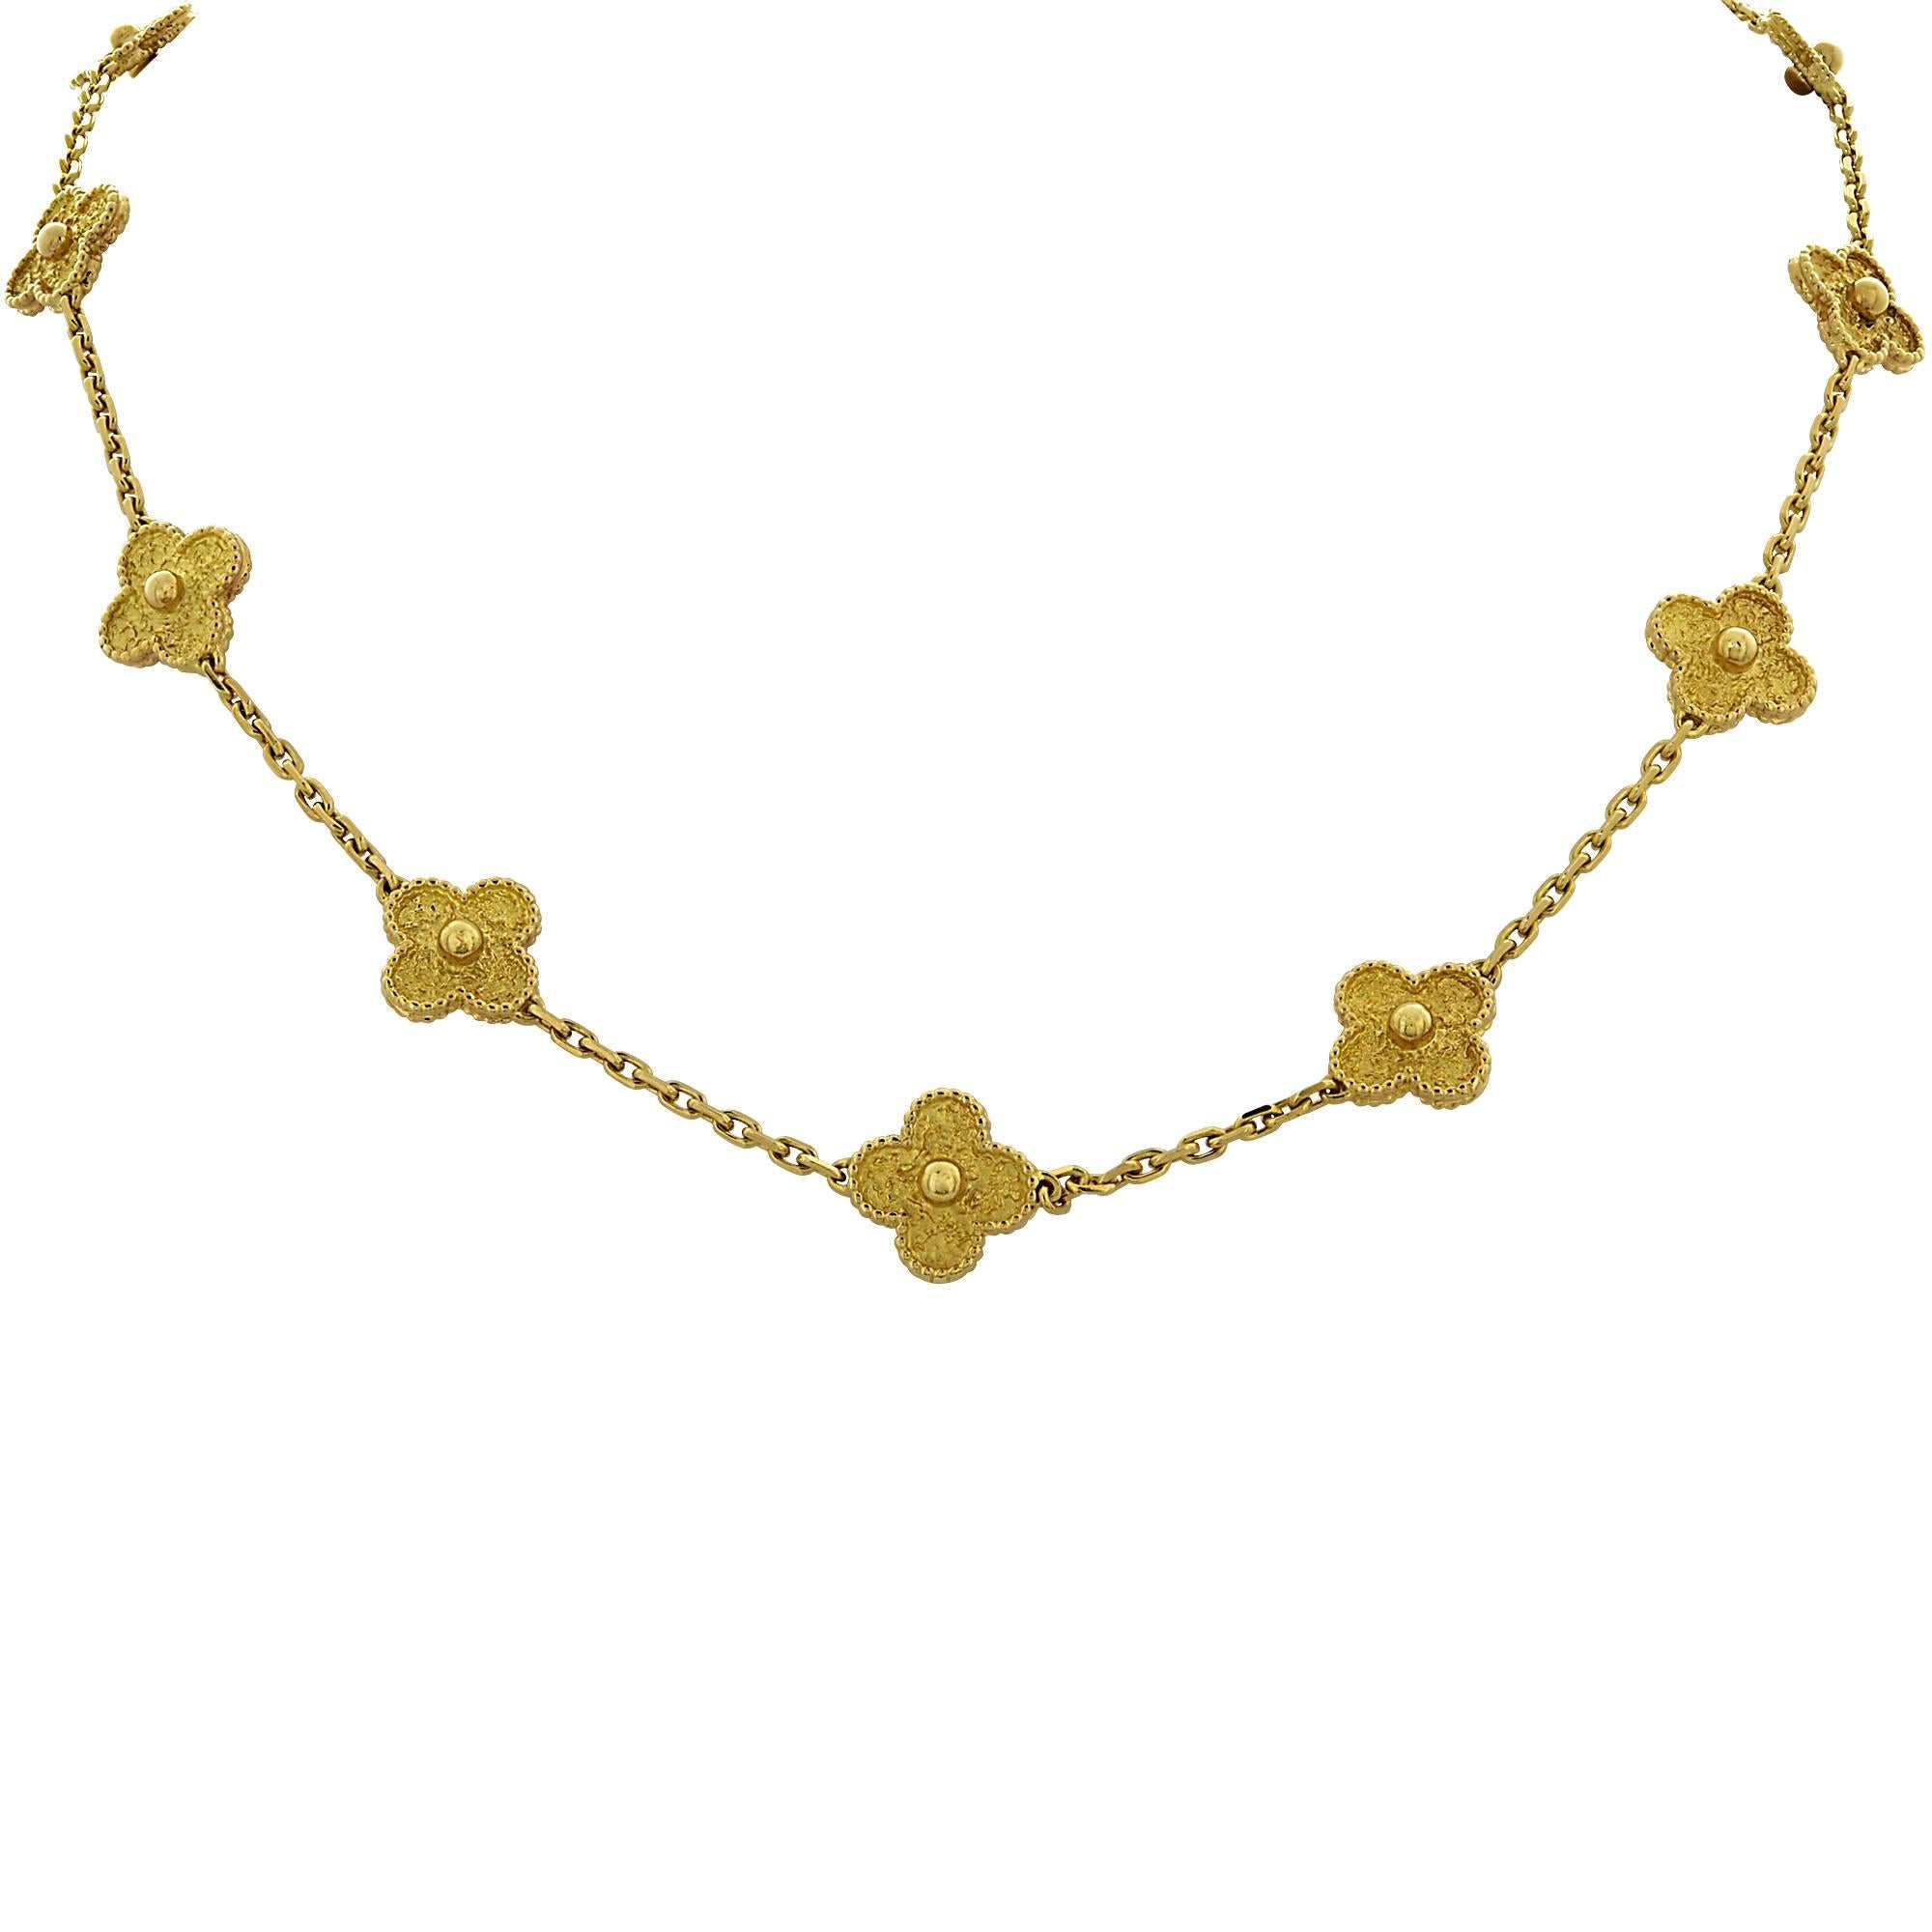 Van Cleef & Arpels Vintage Alhambra long necklace, 20 motifs, yellow gold. In 1968, the Maison created a true icon of luck: the Alhambra collection. The first long necklace was born, combining yellow gold with the pure lines of the Alhambra